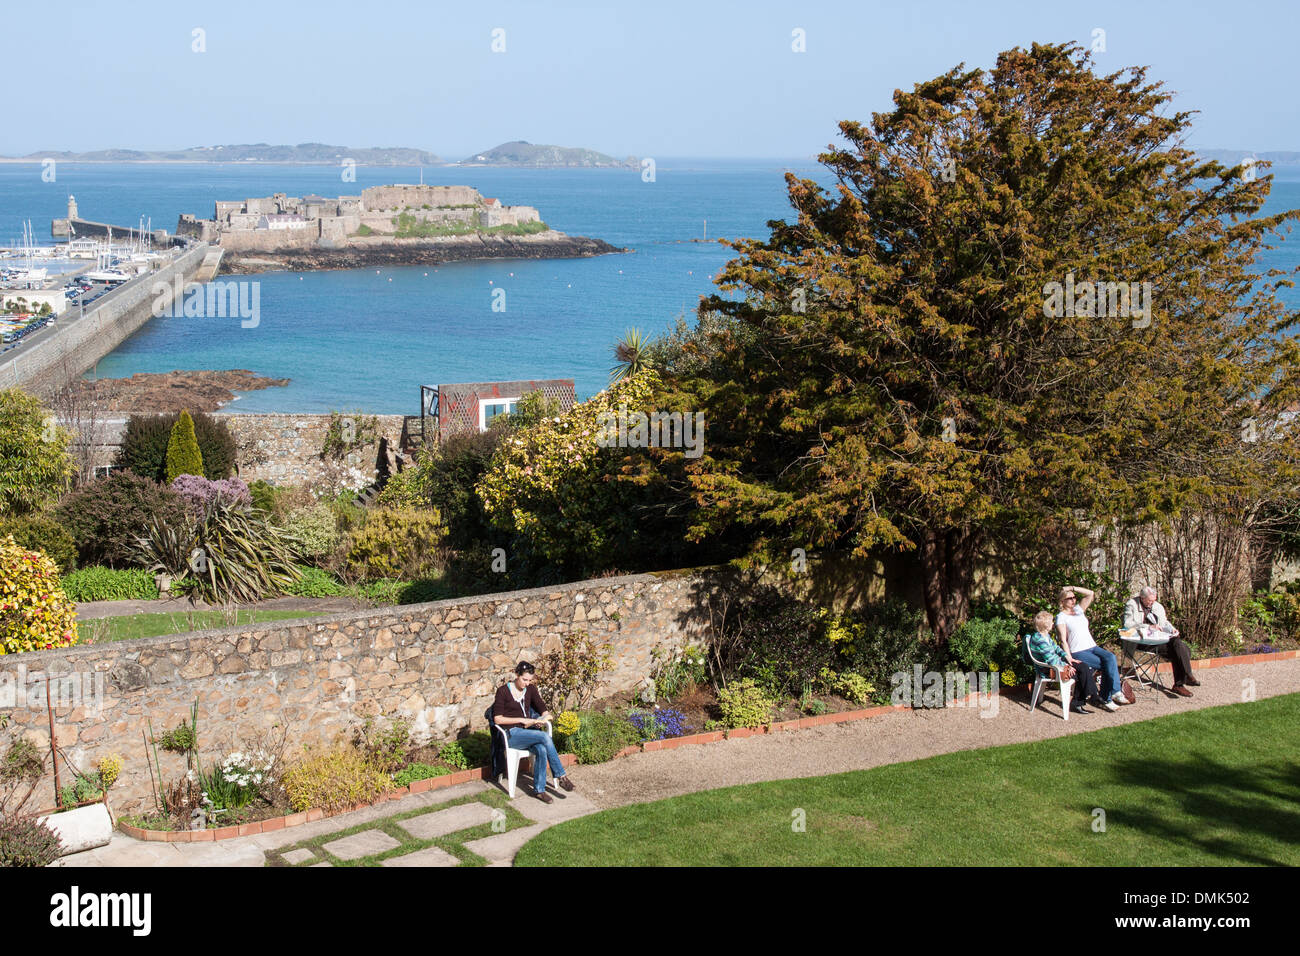 VIEW OF THE GARDEN AT HAUTEVILLE HOUSE, VICTOR HUGO'S HOUSE, WITH CASTLE CORNET AND HERM ISLAND IN THE BACKGROUND, SAINT PETER PORT, GUERNSEY, CHANNEL ISLANDS Stock Photo